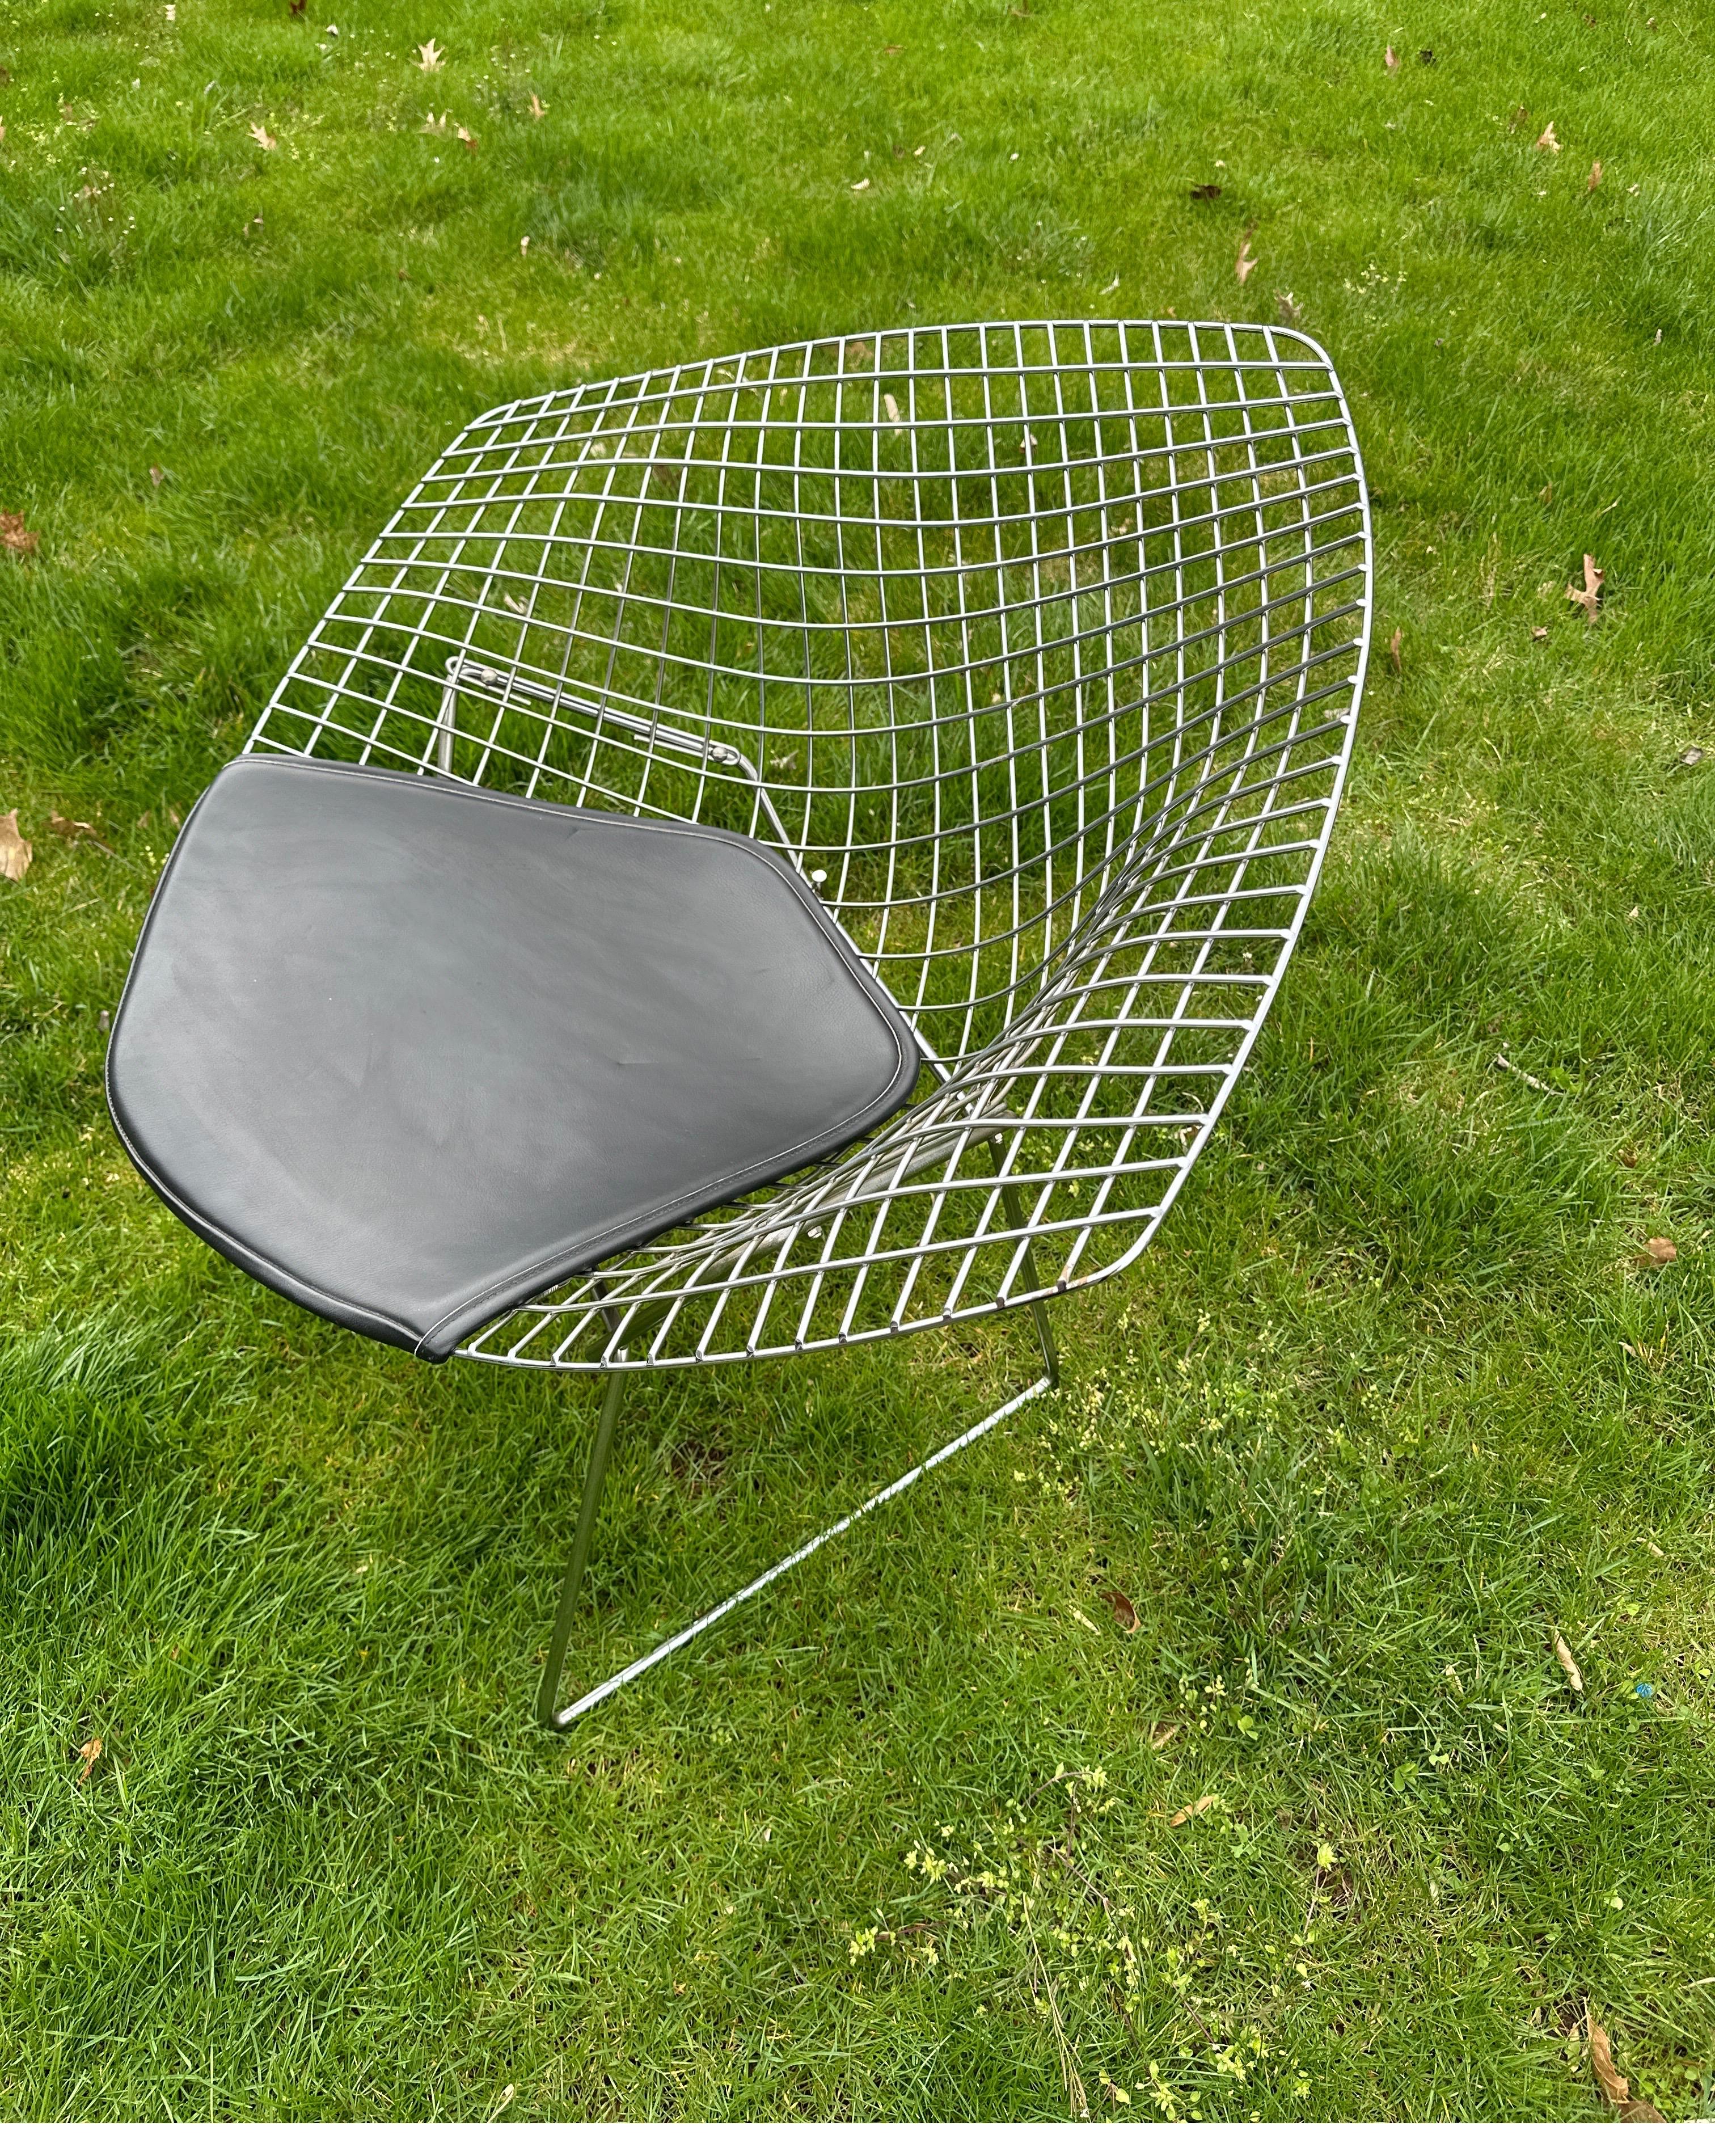 Chrome diamond chair designed by Harry Bertoia for Knoll - a mid century classic, appears to be fairly recently made. Black leather seat highlights the striking chrome. Always surprising how comfortable these are!
Goes anywhere, mixes with a